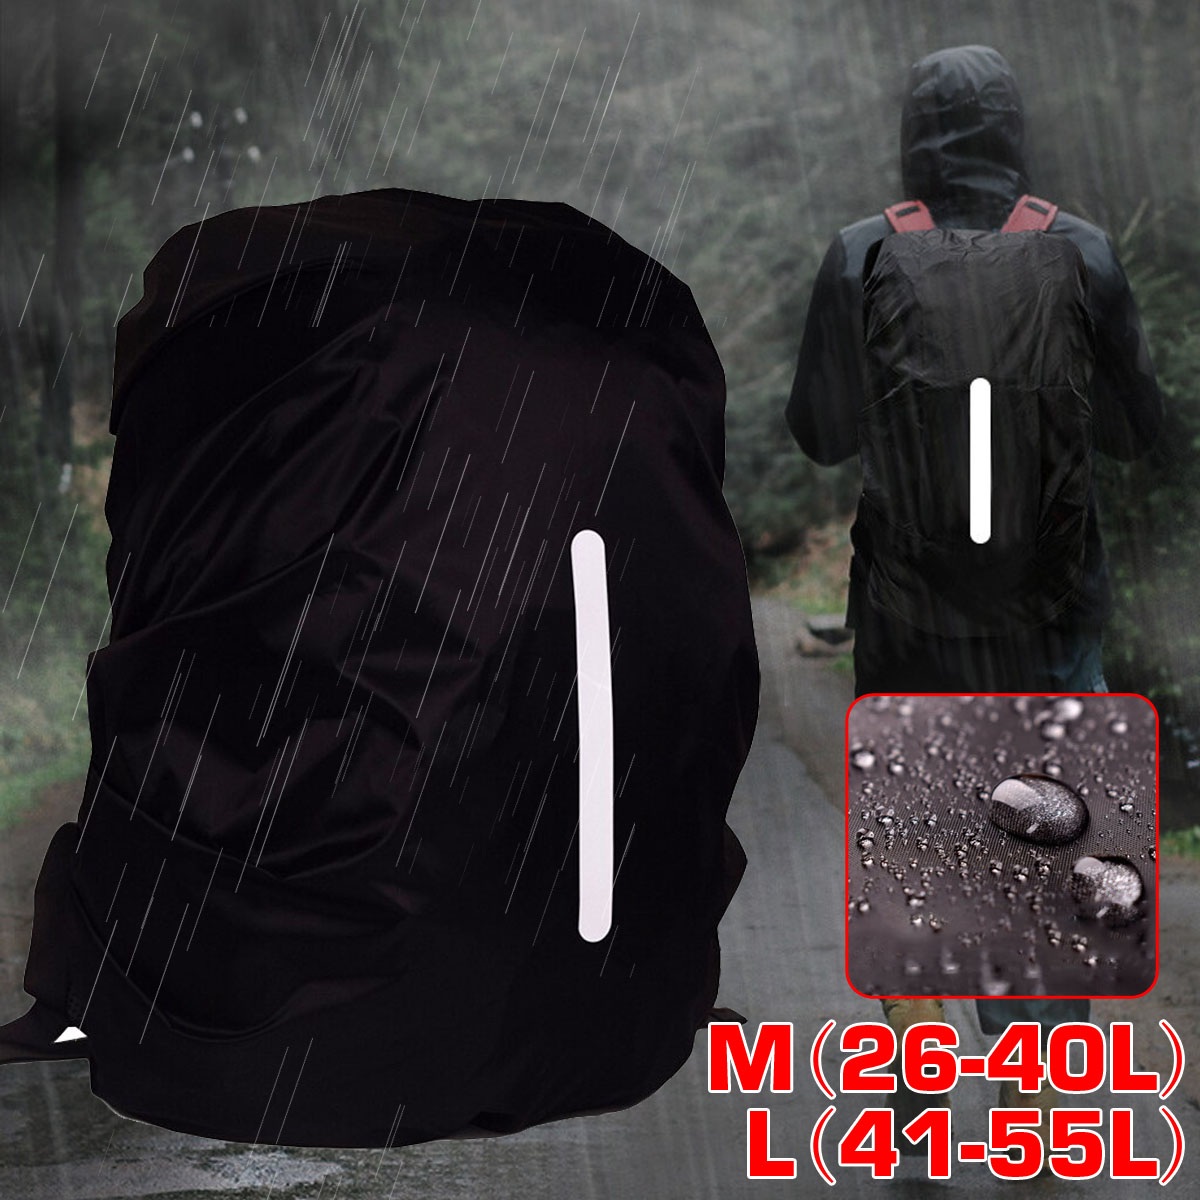 Portable-Outdoor-Backpack-Waterproof-Dust-Cover-Travel-Backpack-Rain-Cover-Hiking-Camping-Sports-Acc-1790124-2